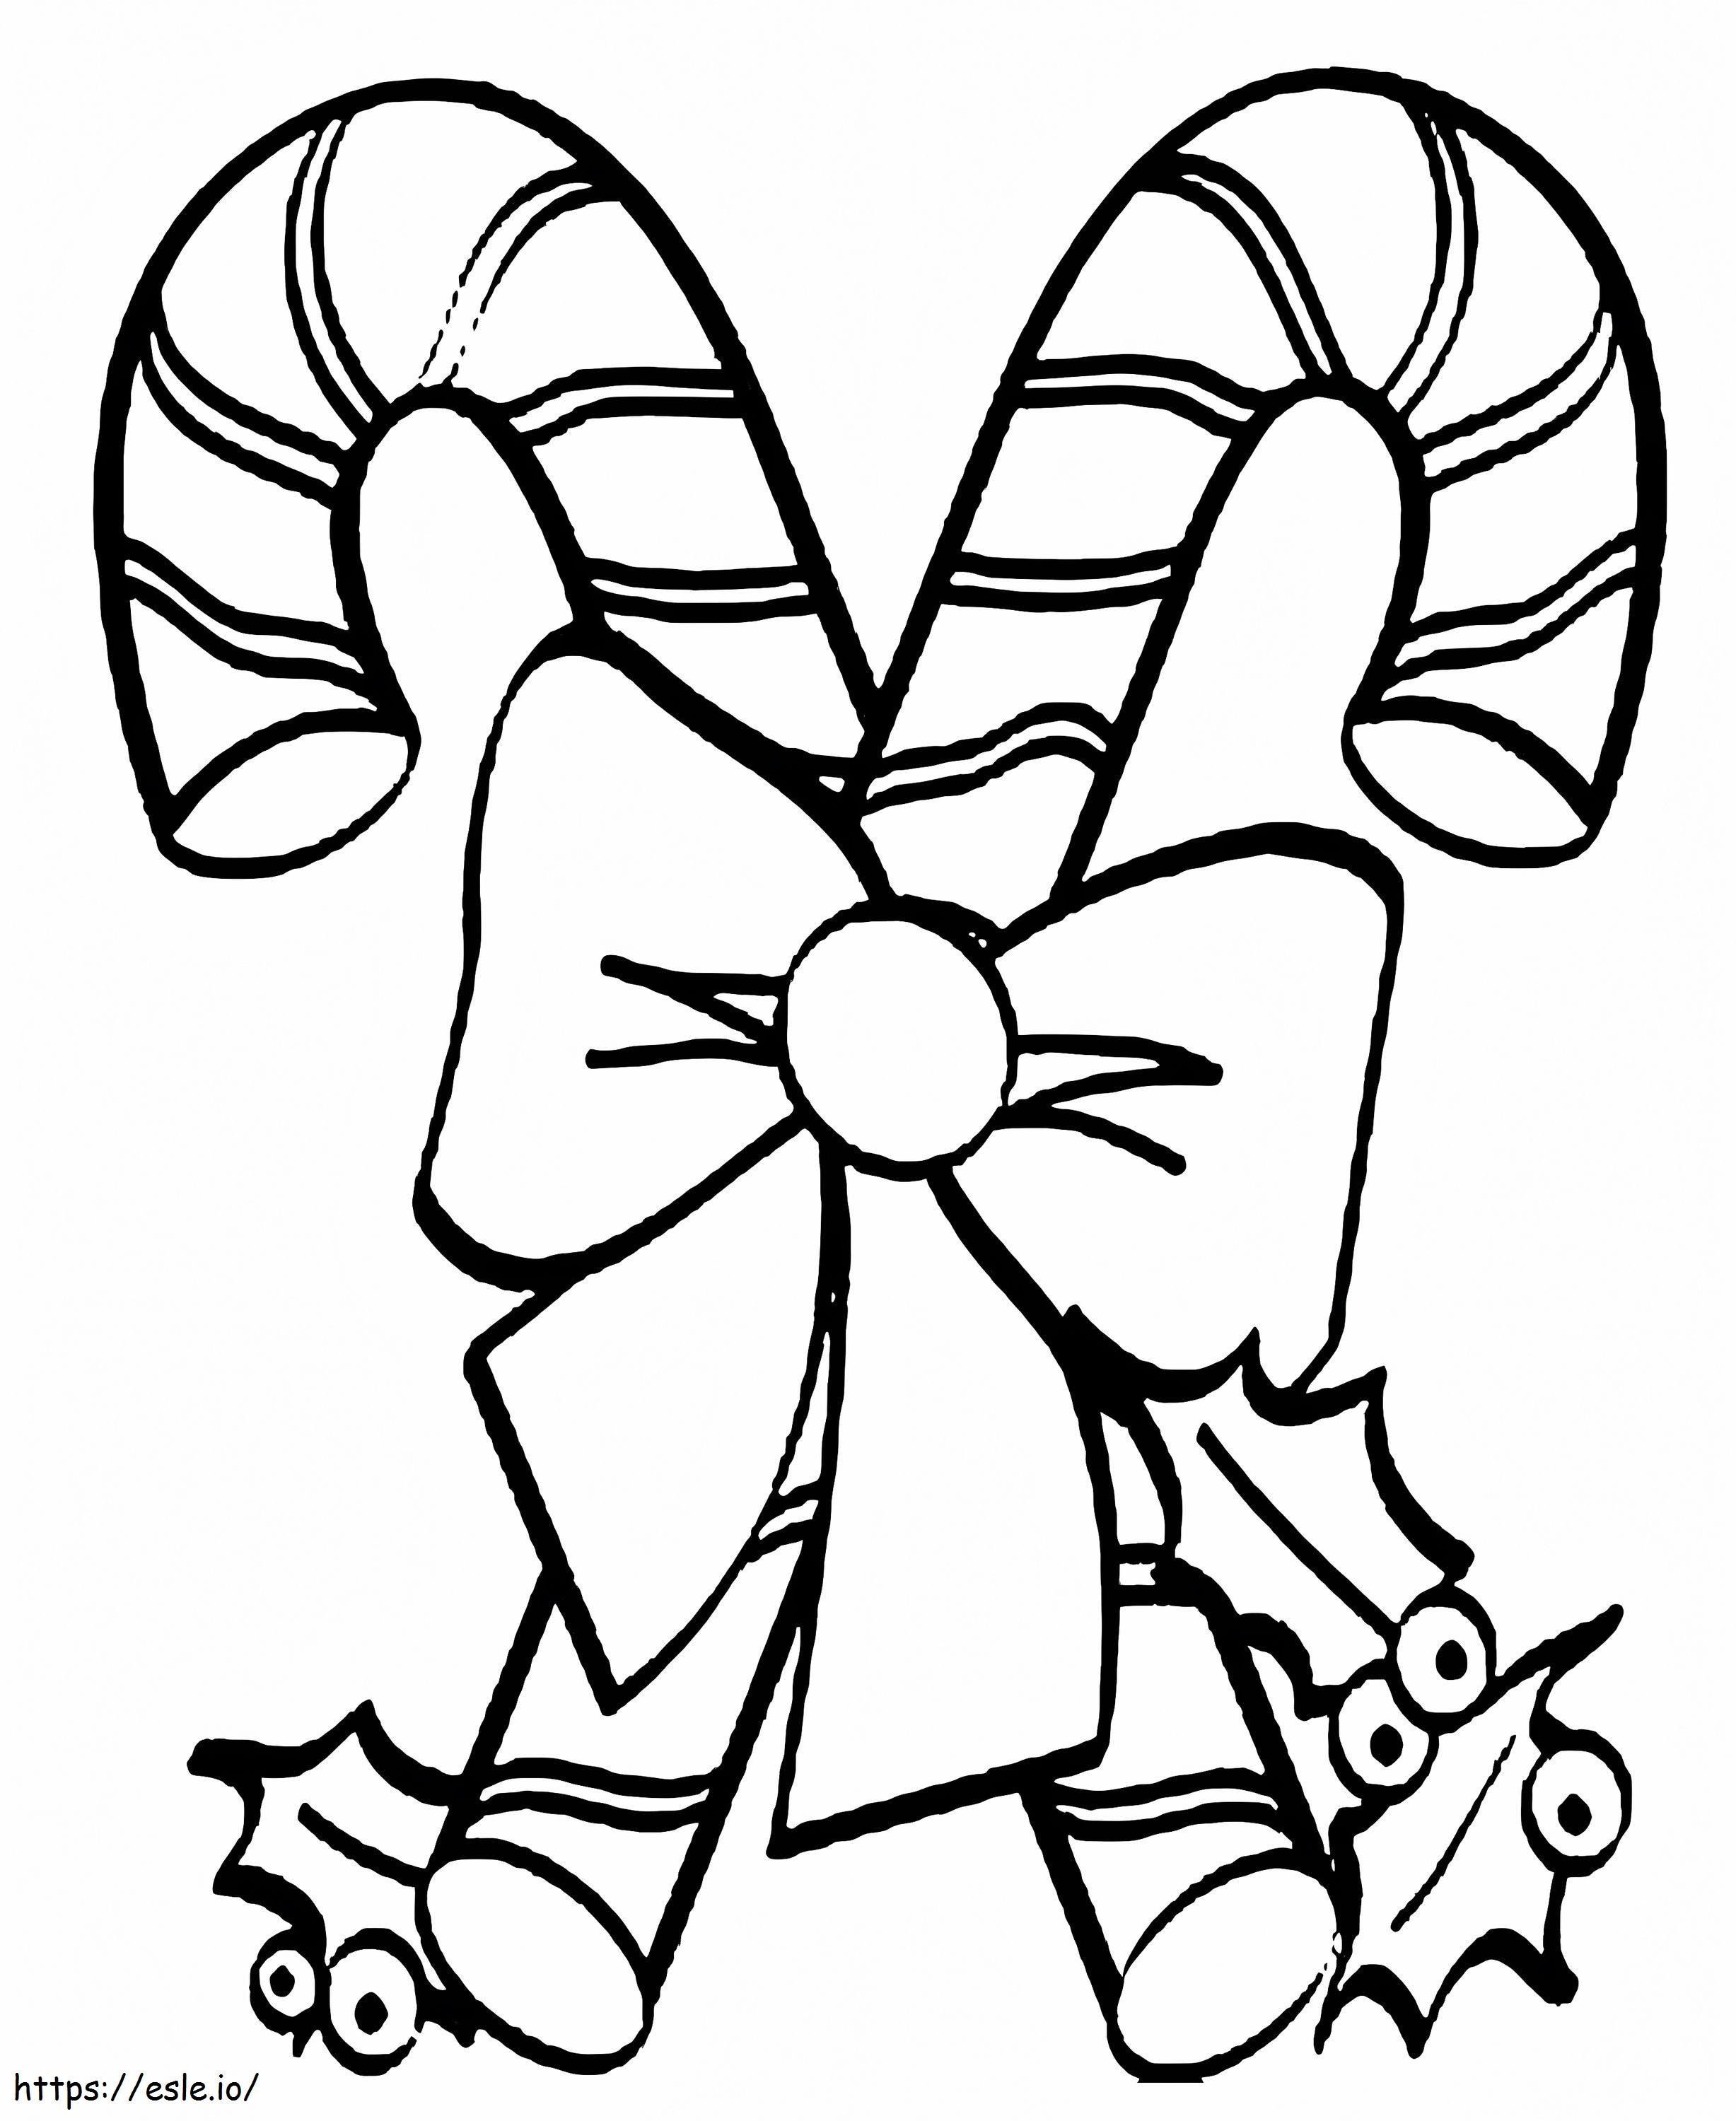 Candy Canes With Ribbon coloring page